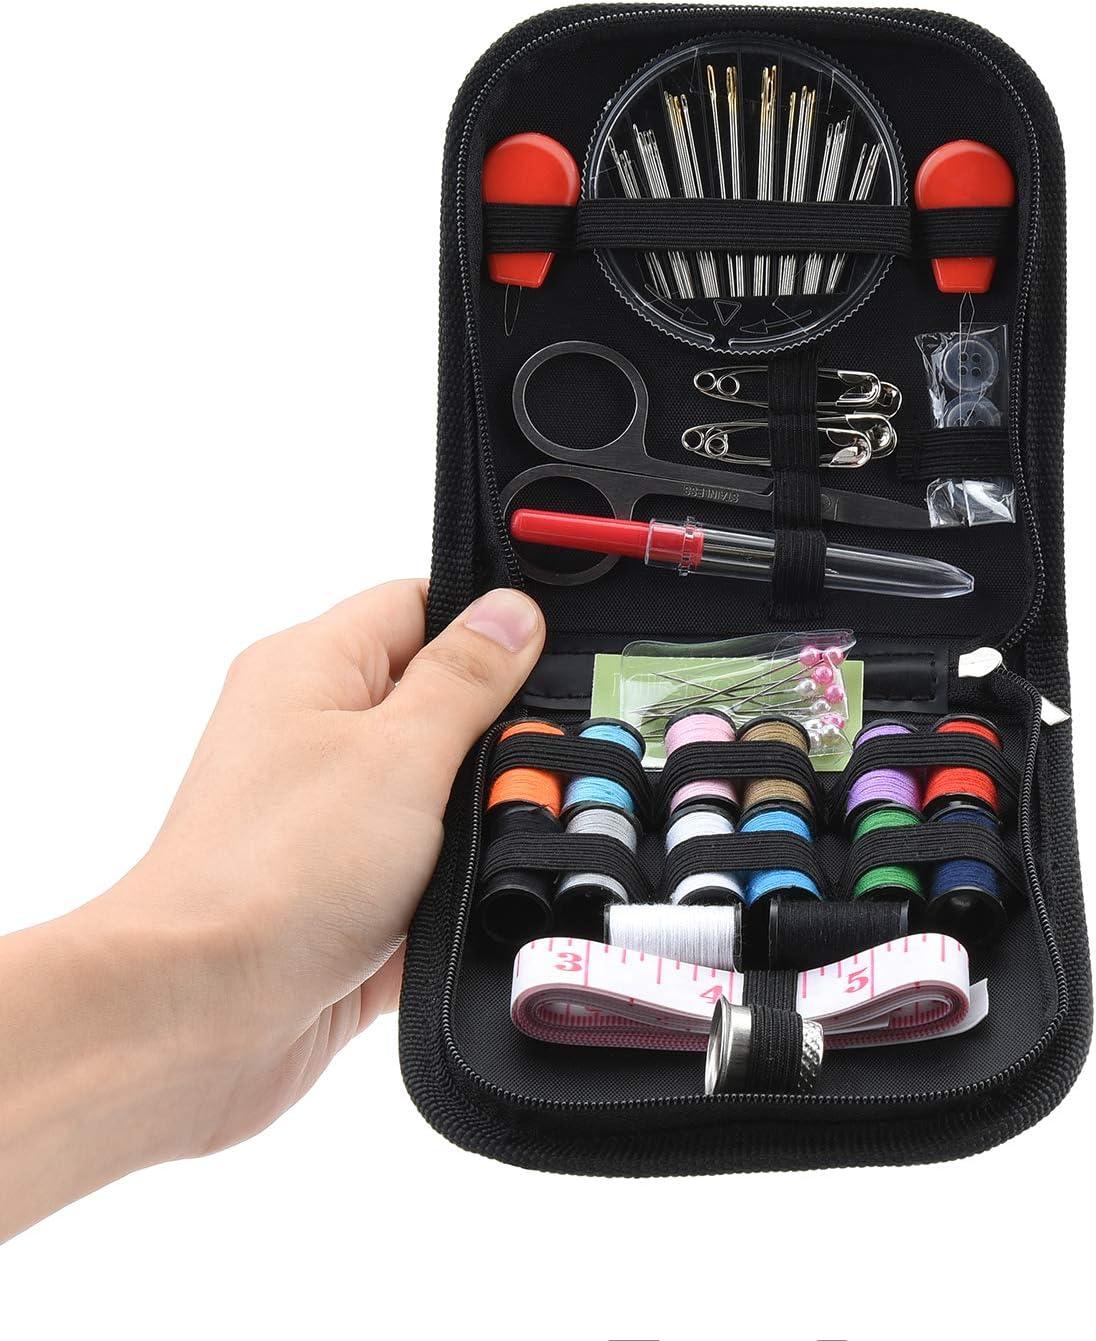 Sewing Kit With 100 Sewing Supplies And Accessories 24 Color Threads Needle  And Thread Kit Products For Small Fixes Basic Mini Travel Sewing Kit For  Emergency Repairs